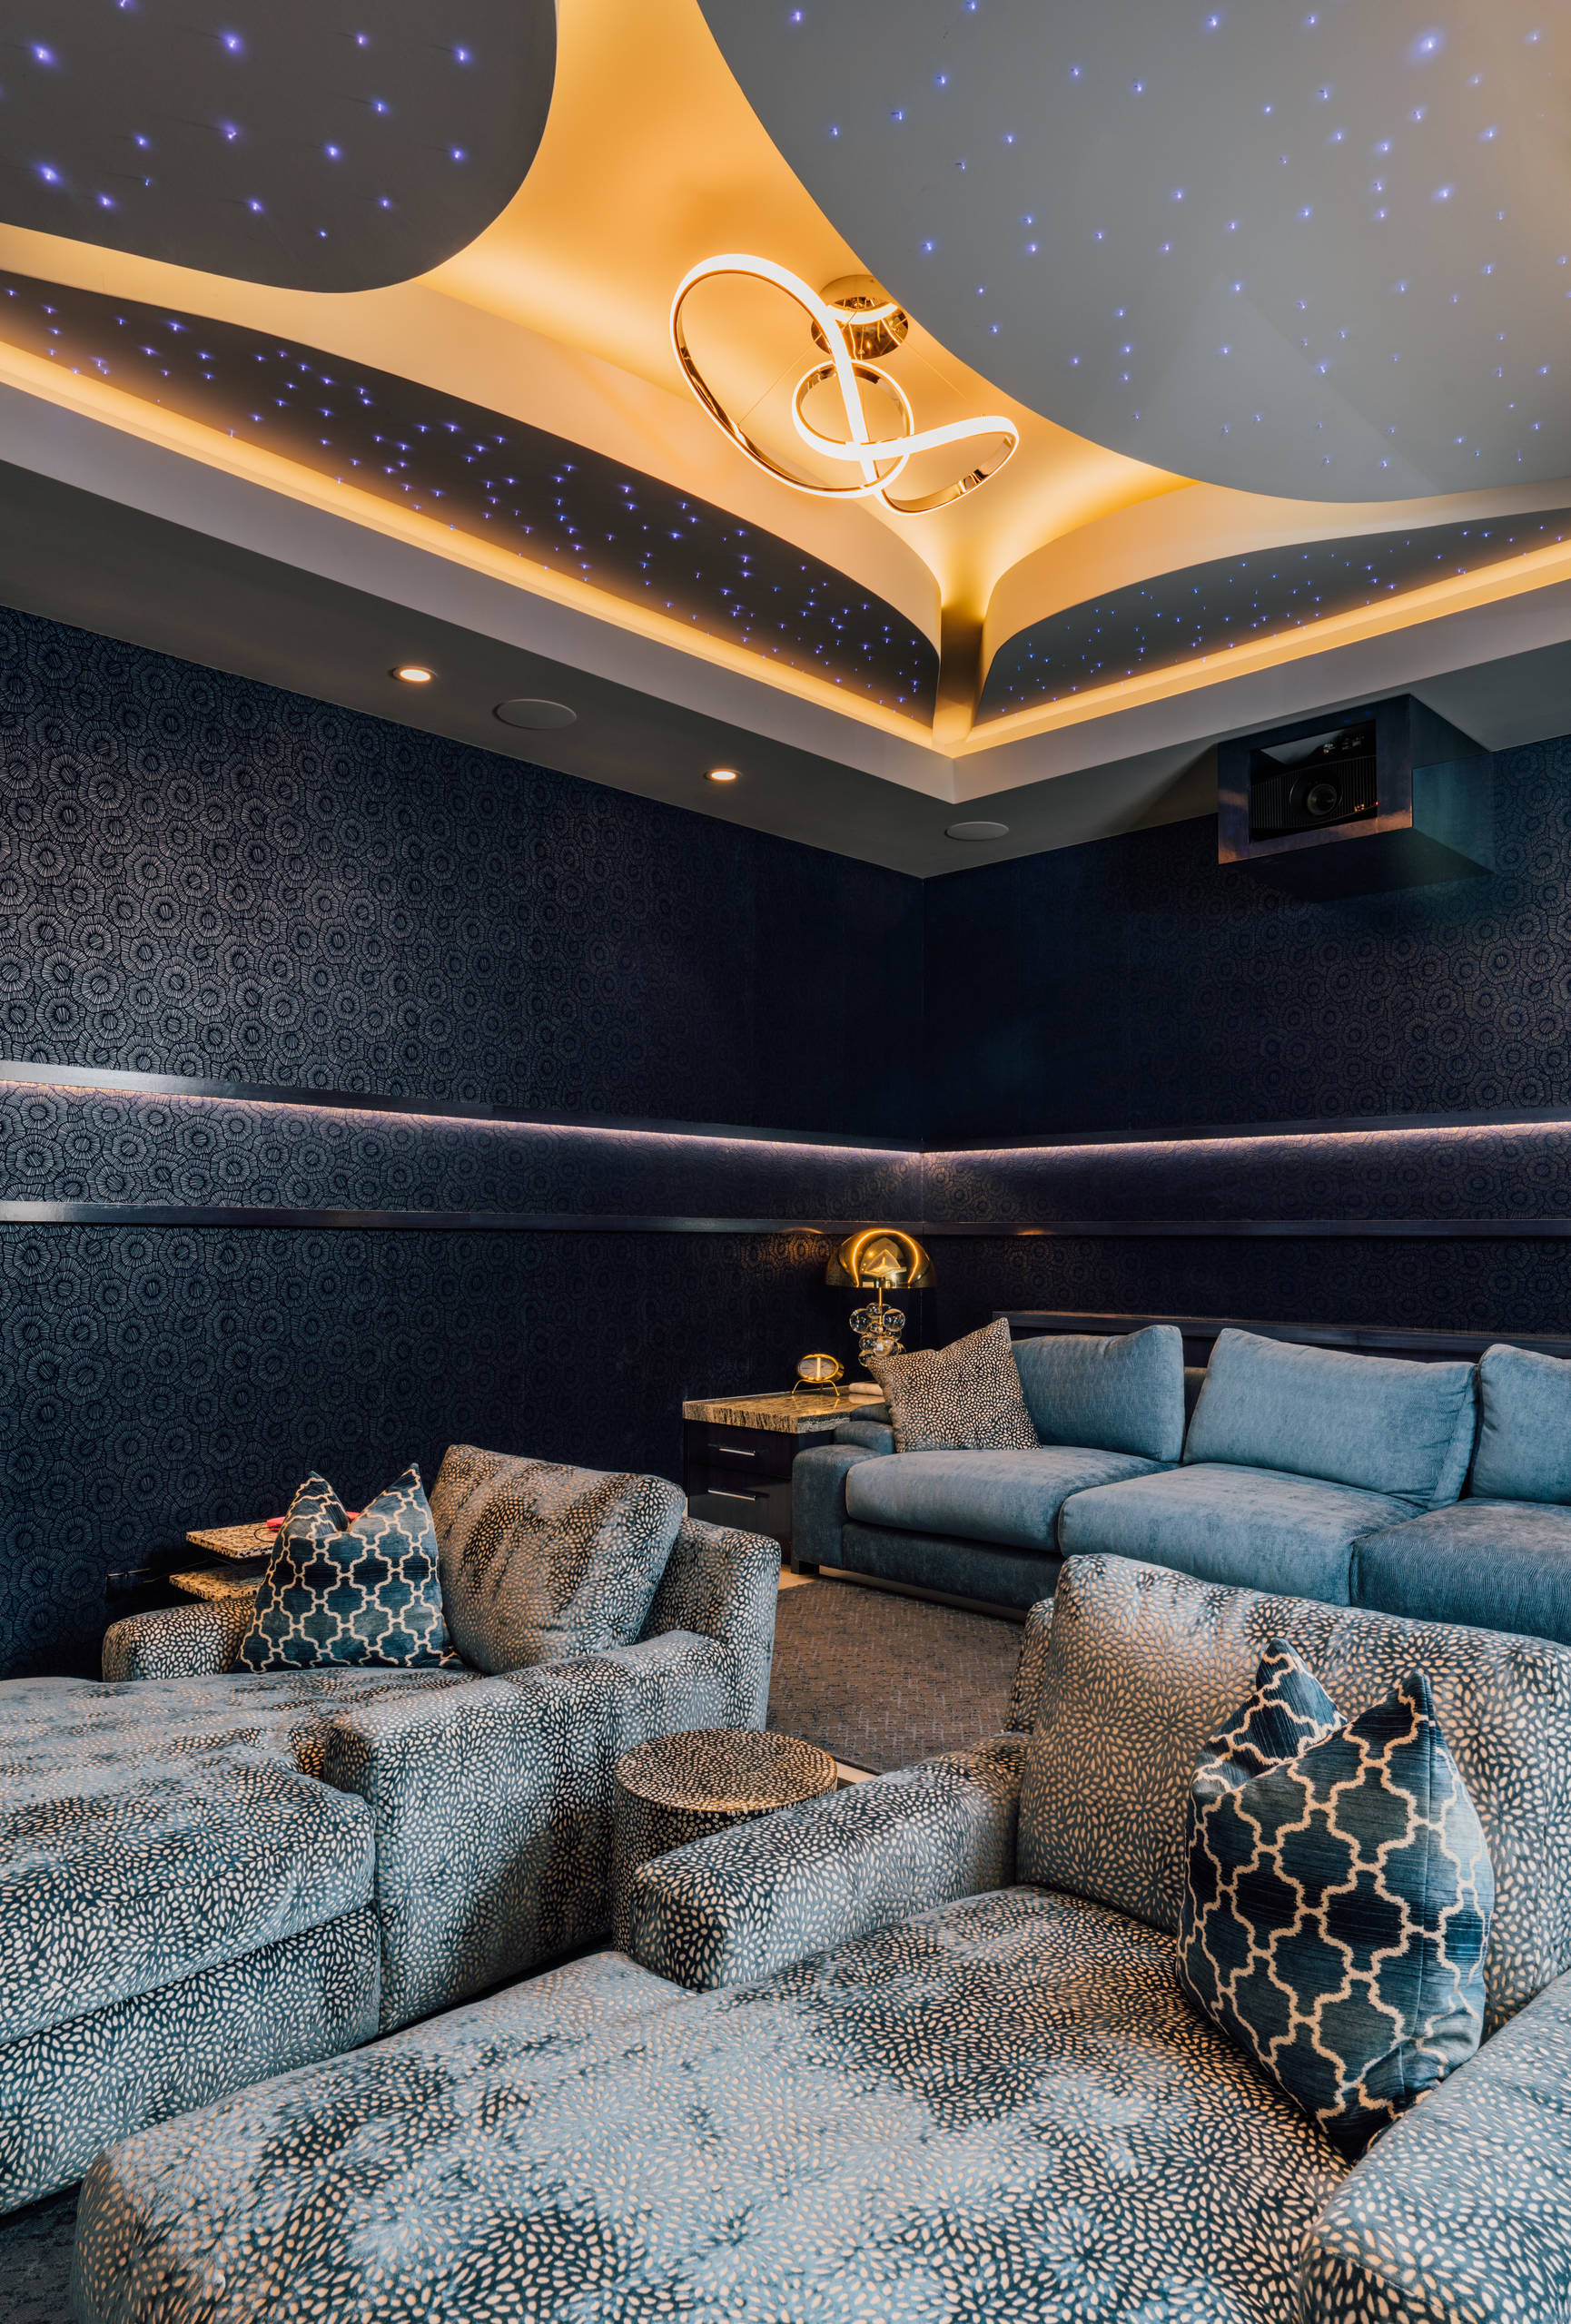 Home Theater Ceiling Design Photos